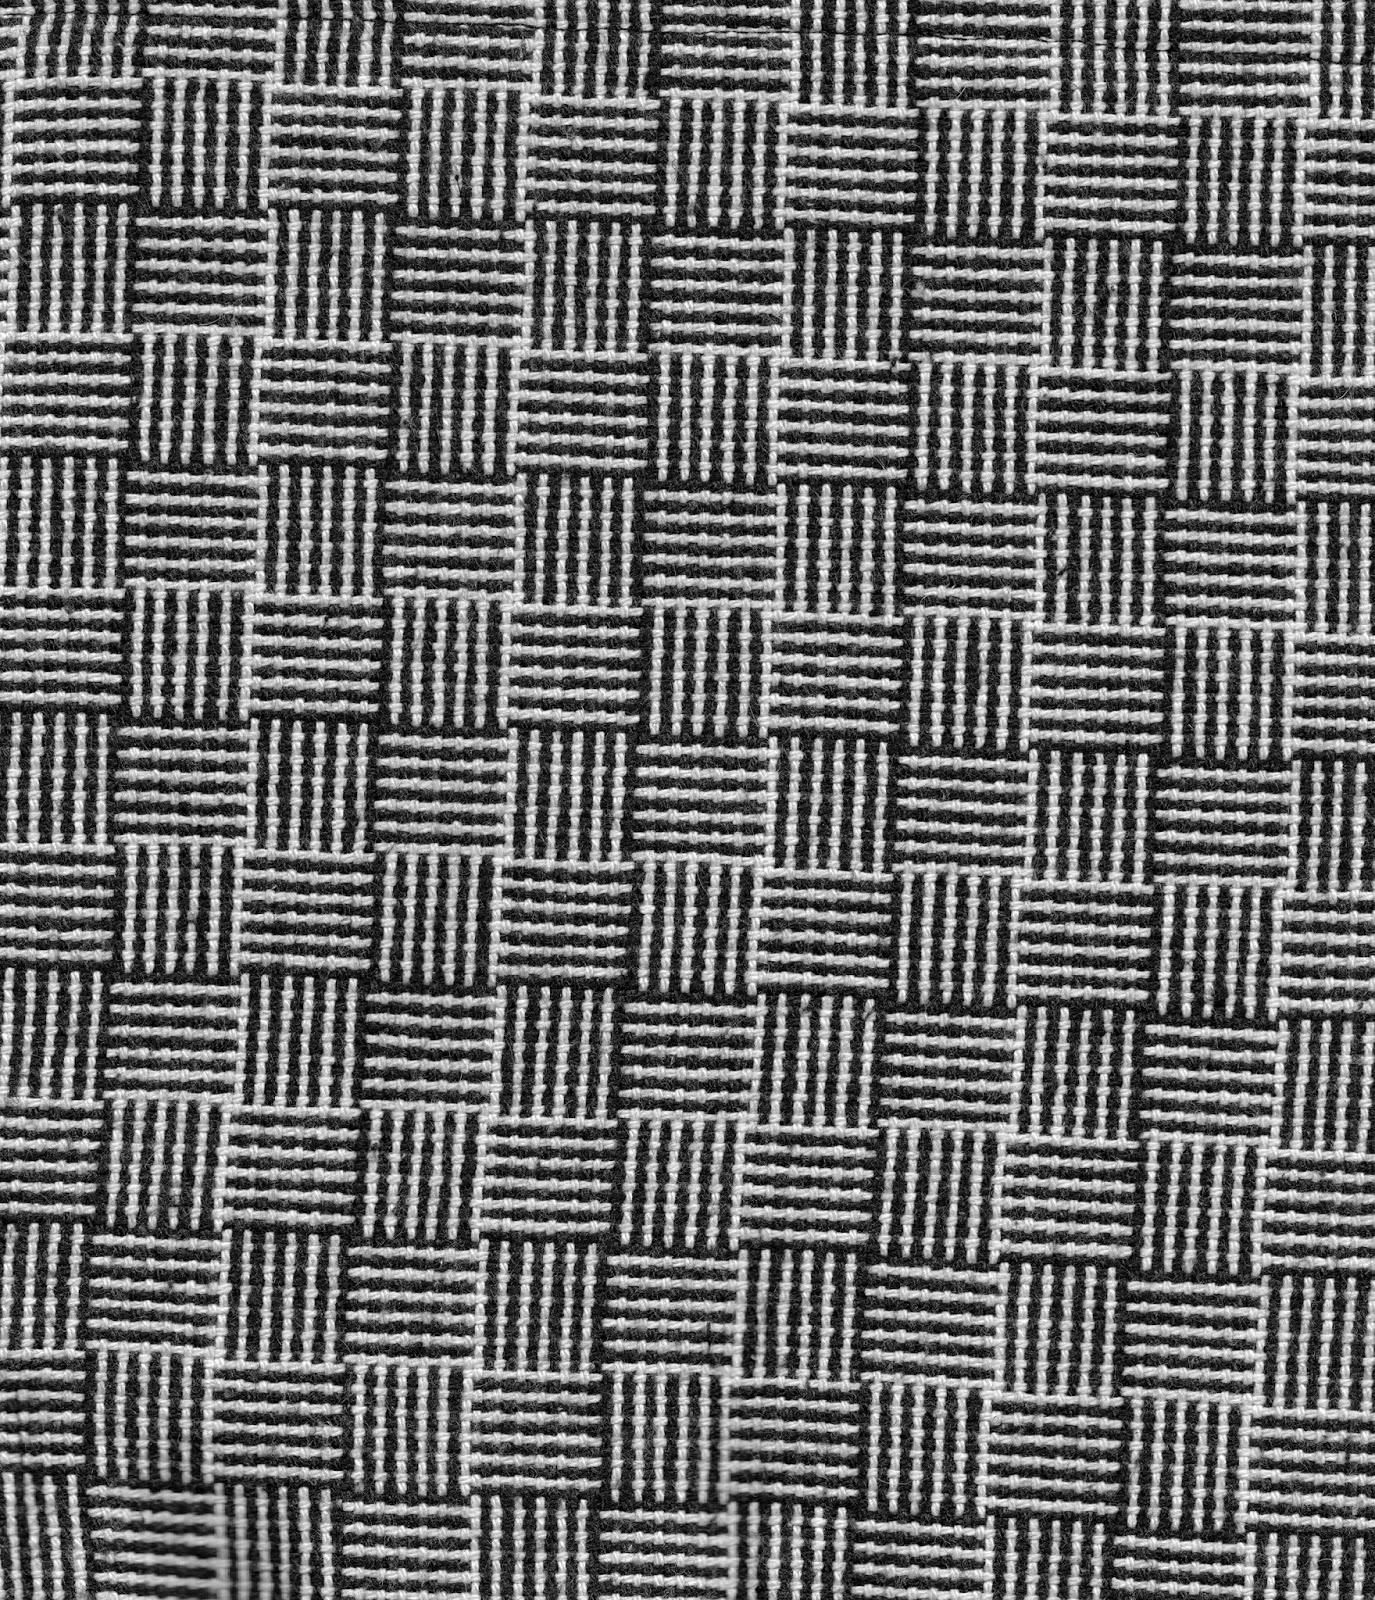 Meticulous Madness: Freebie Friday - Black & White Textile Textures 2